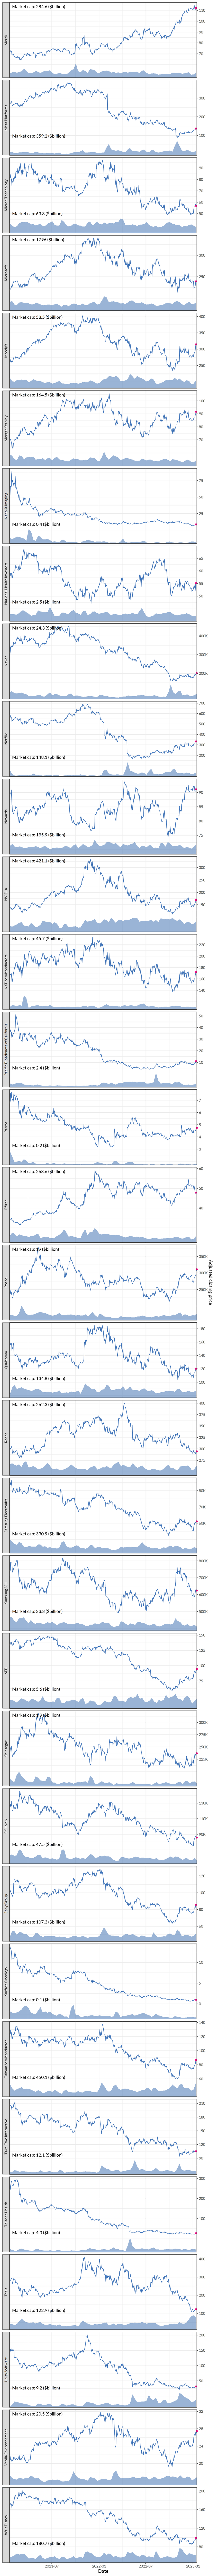 Adjusted stock prices of companies with names starting with letters M-Z over the last 2 years. The blue shade at the bottom of each panel indicates trading volume per day (smoothed for visualization).